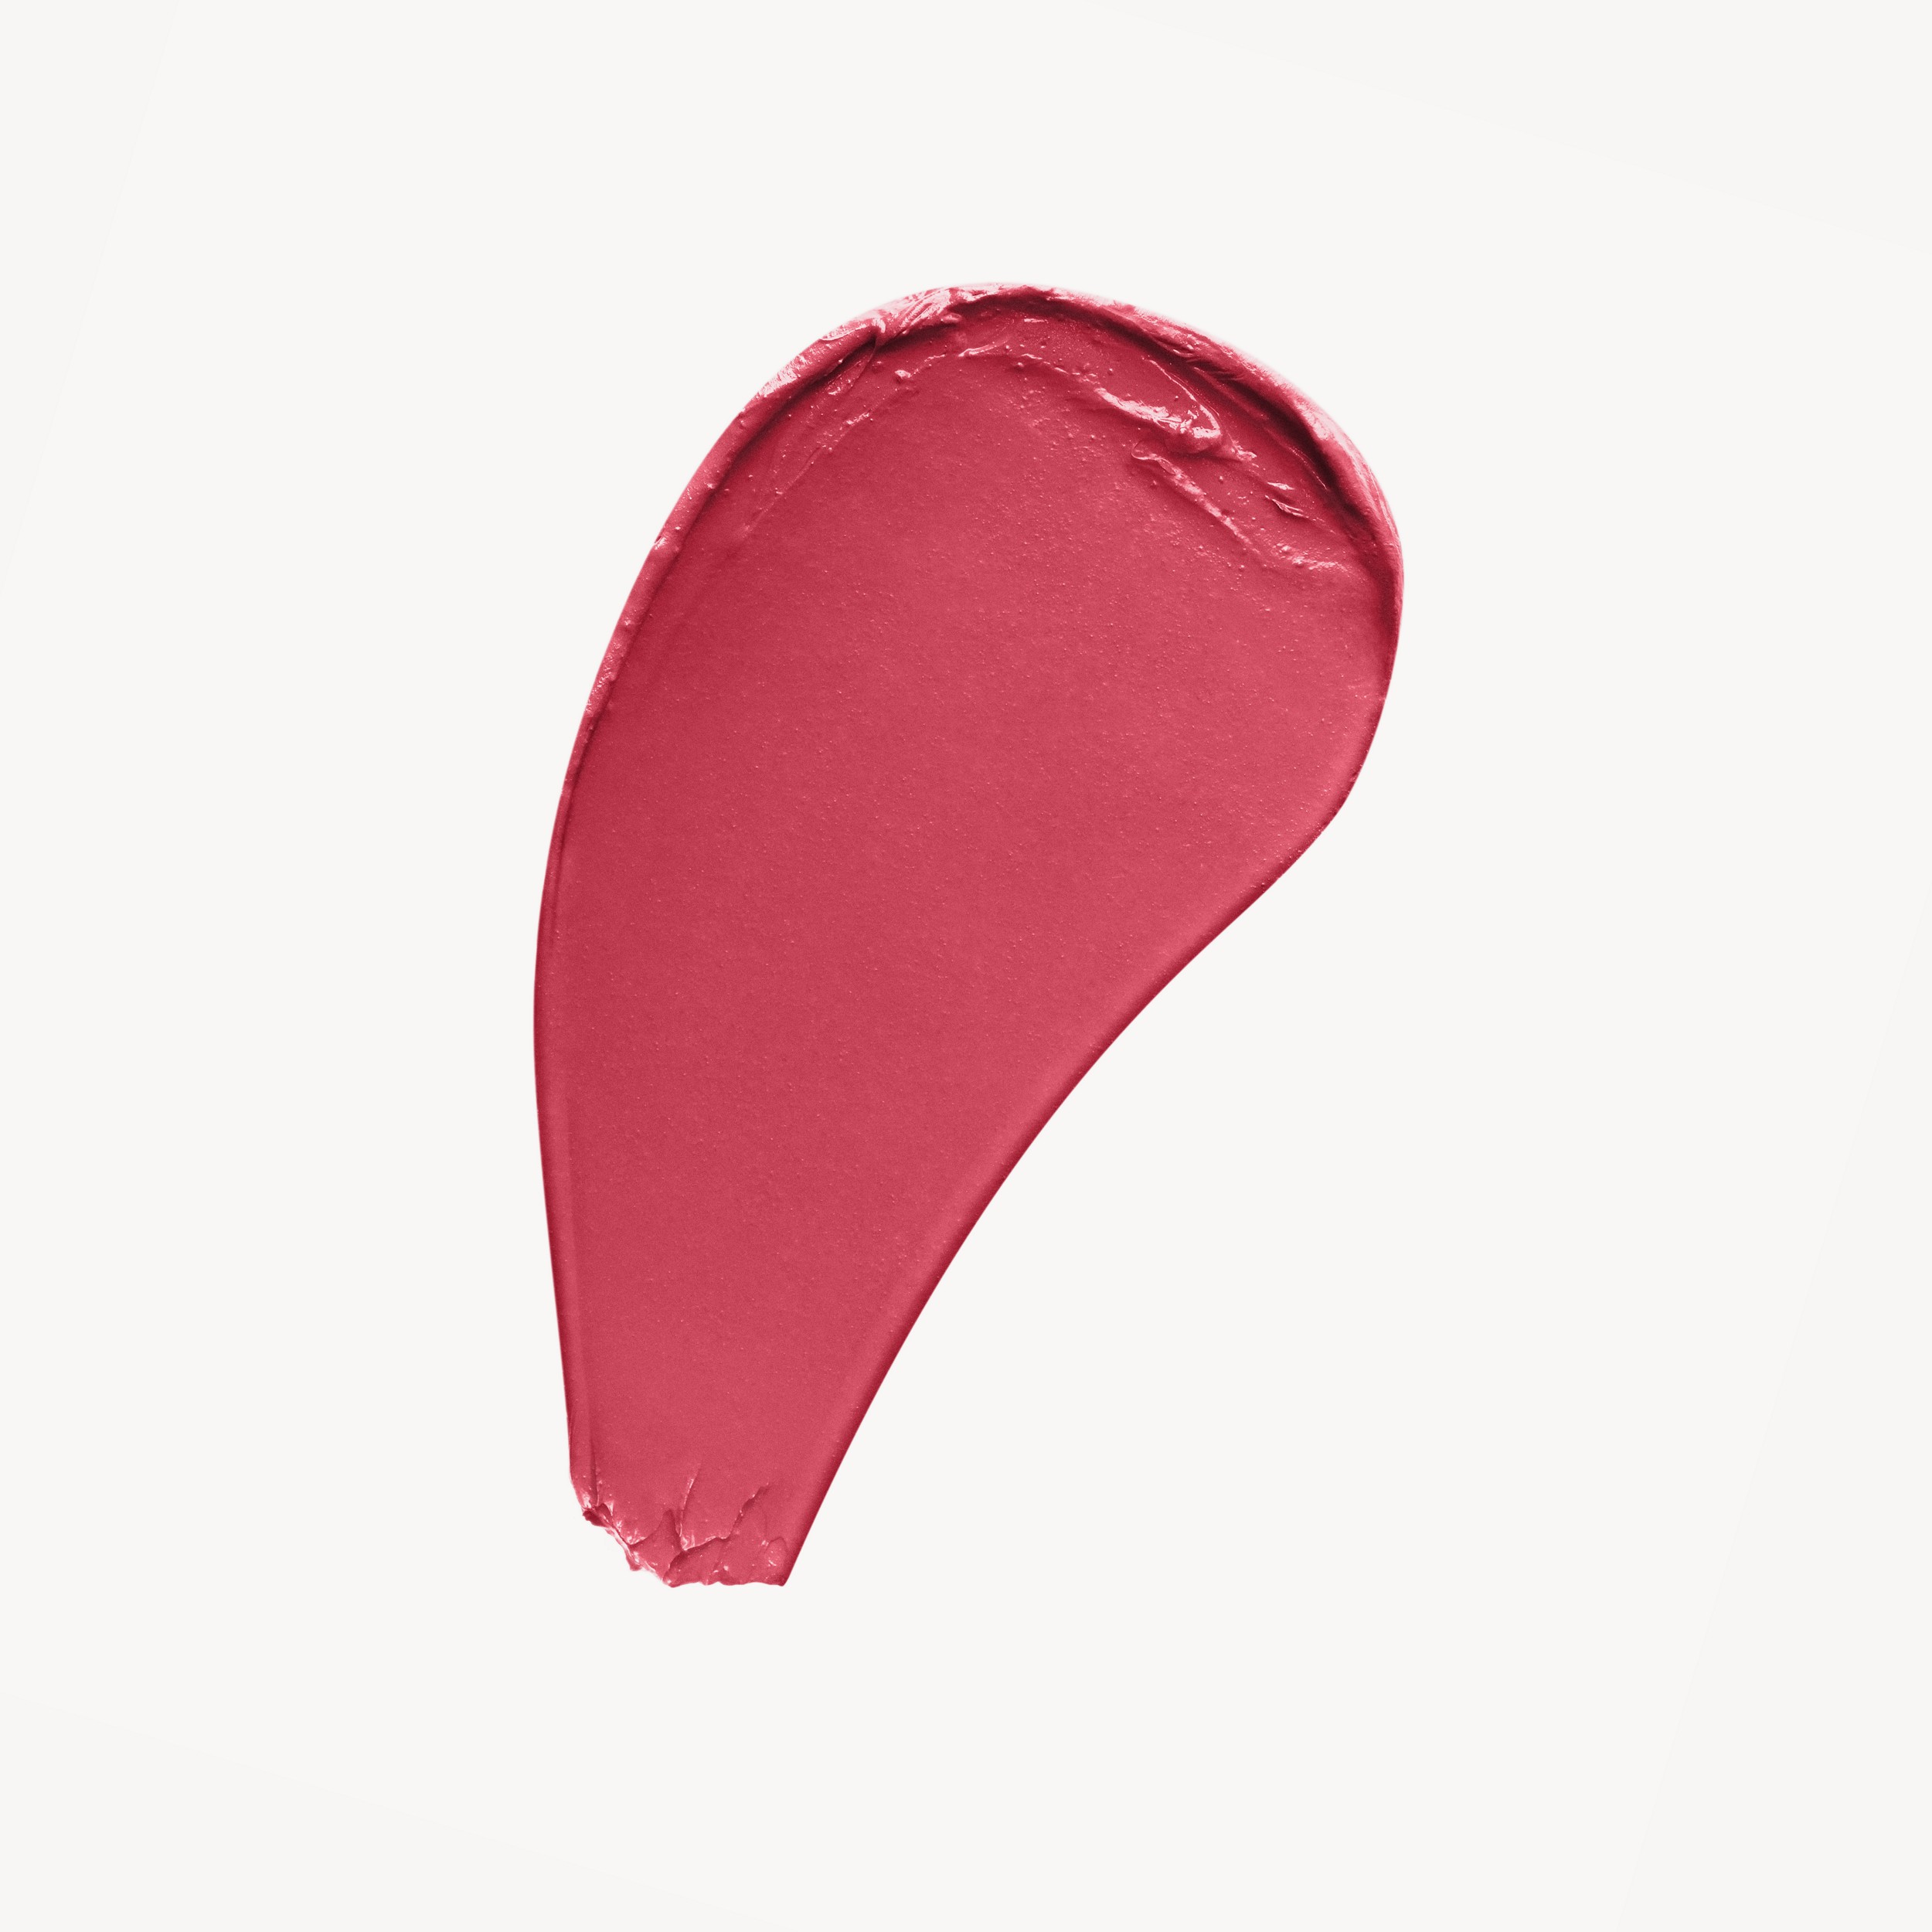 Burberry Kisses Matte – Vintage Pink No.36 - Donna | Sito ufficiale Burberry® - 2